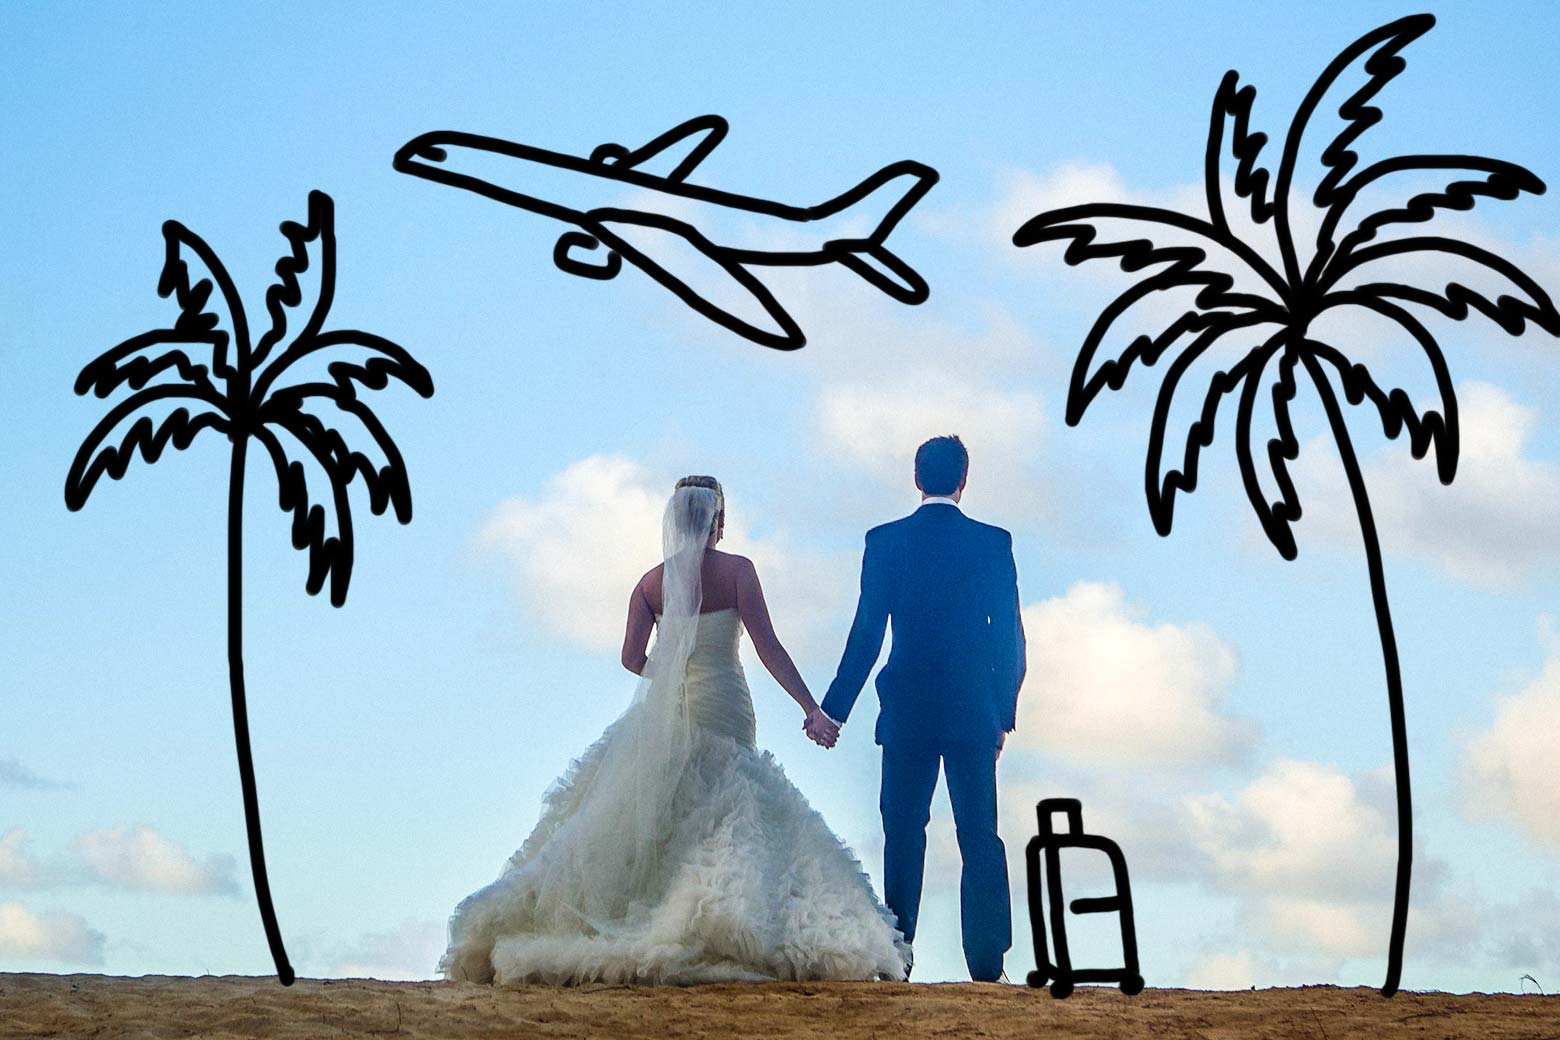 A bride and groom on a beach, with palm trees and an airplane sketched into the picture.